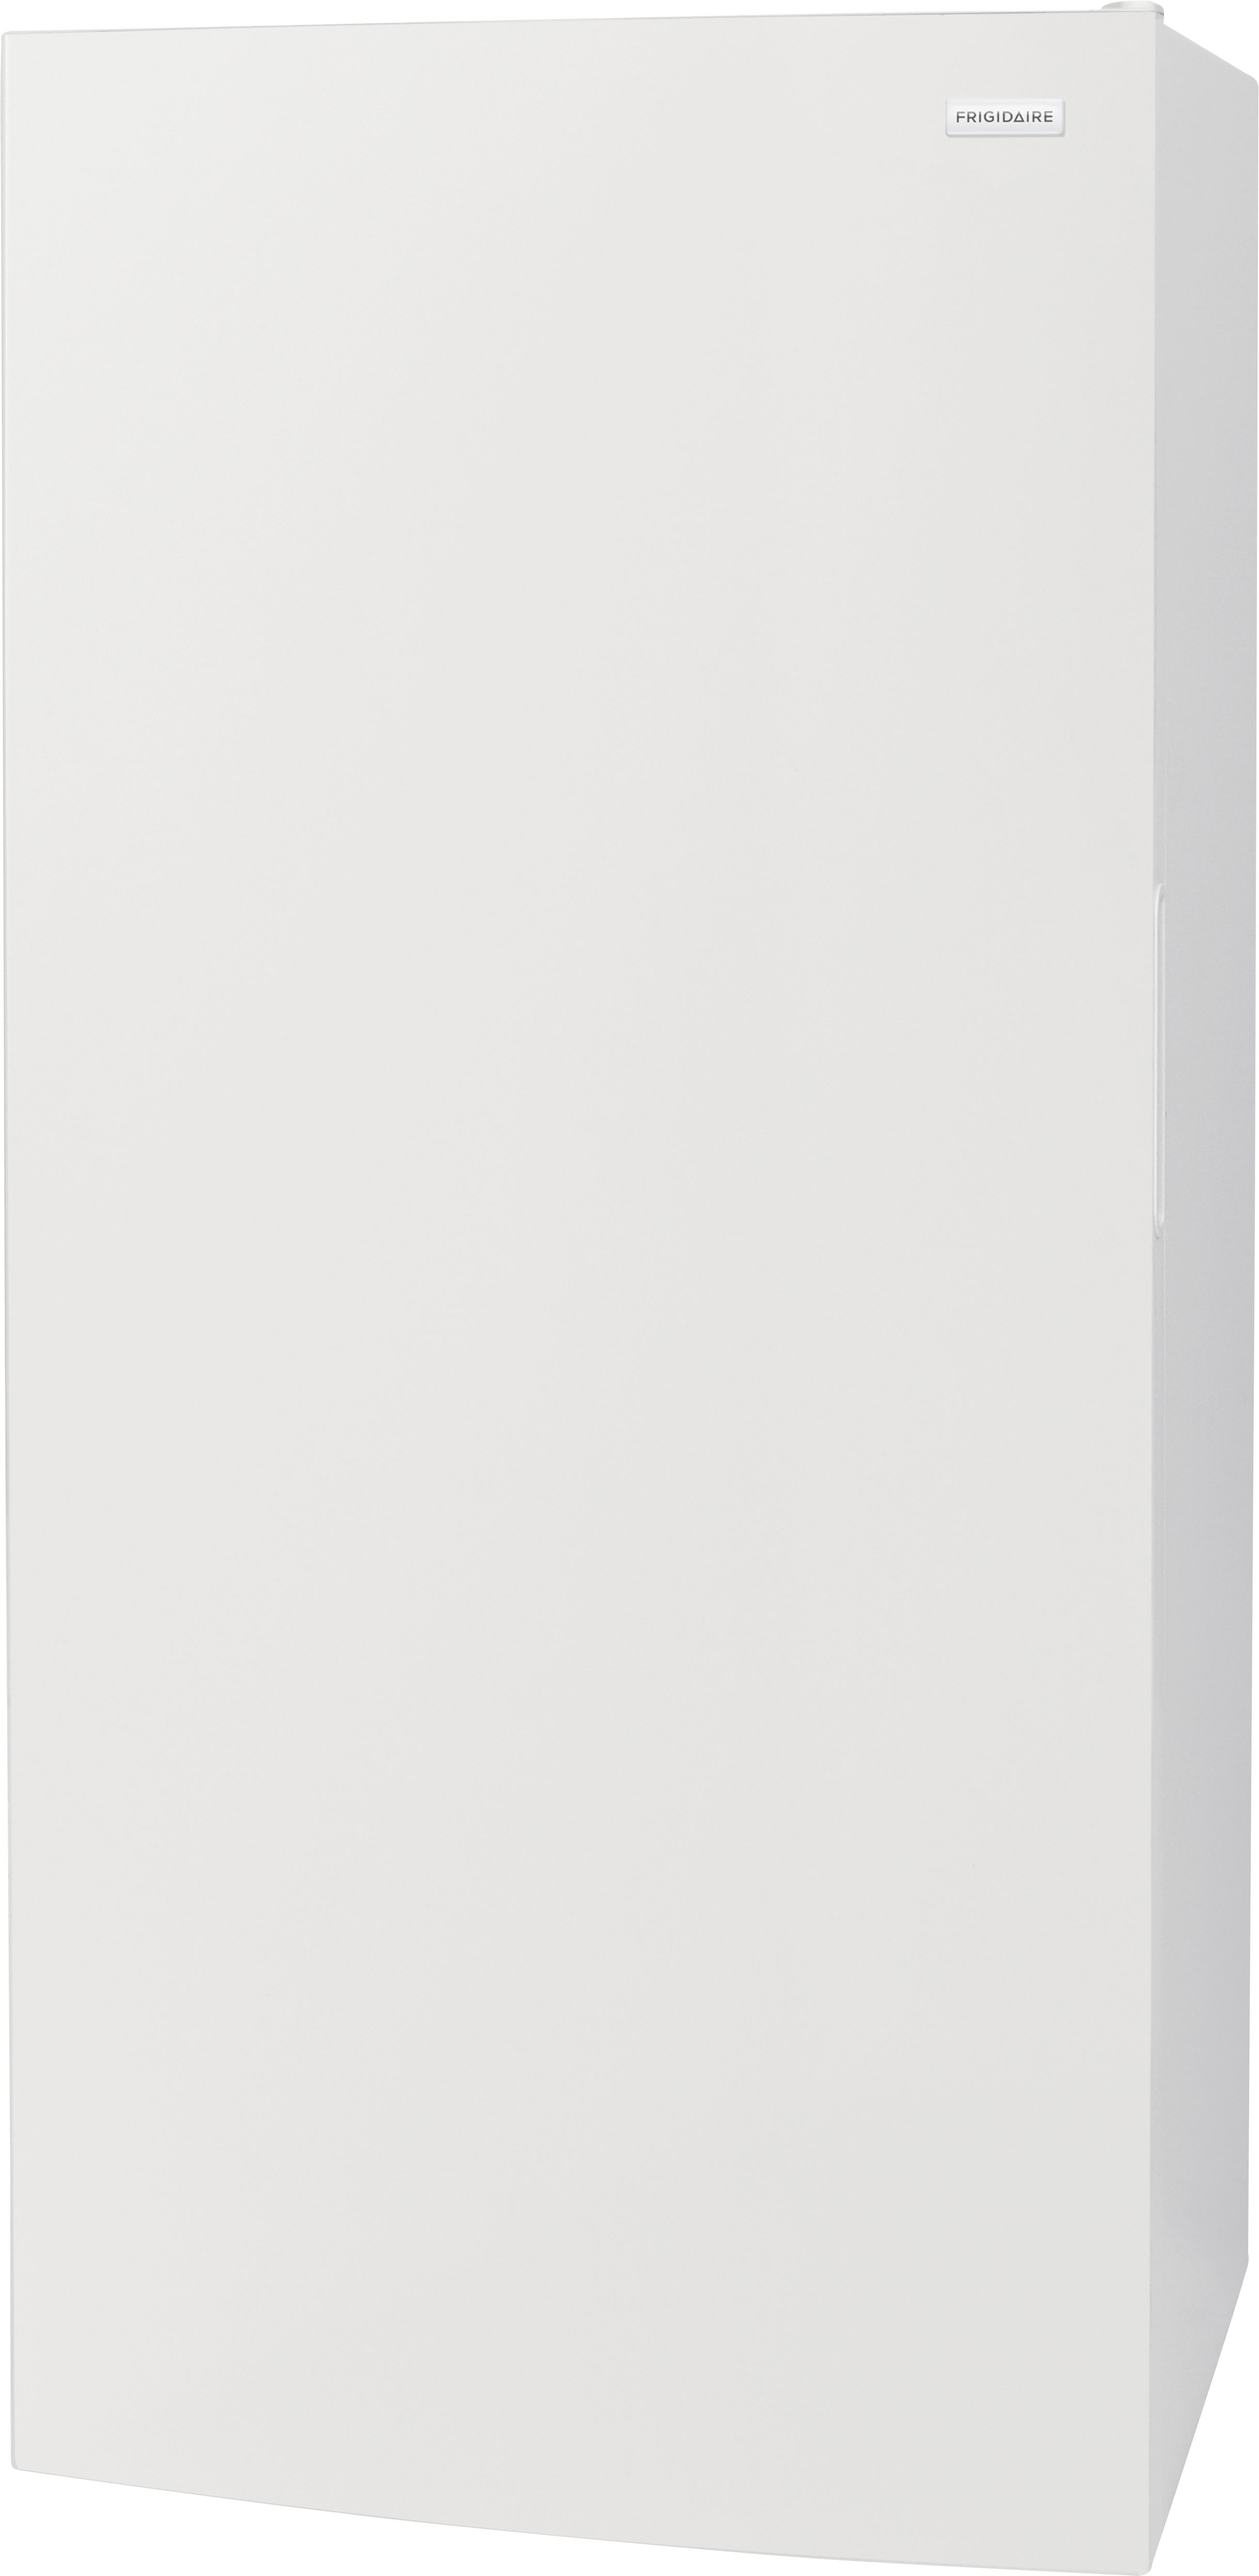 Angle View: GE - 17.3 Cu. Ft. Frost-Free Upright Freezer - White